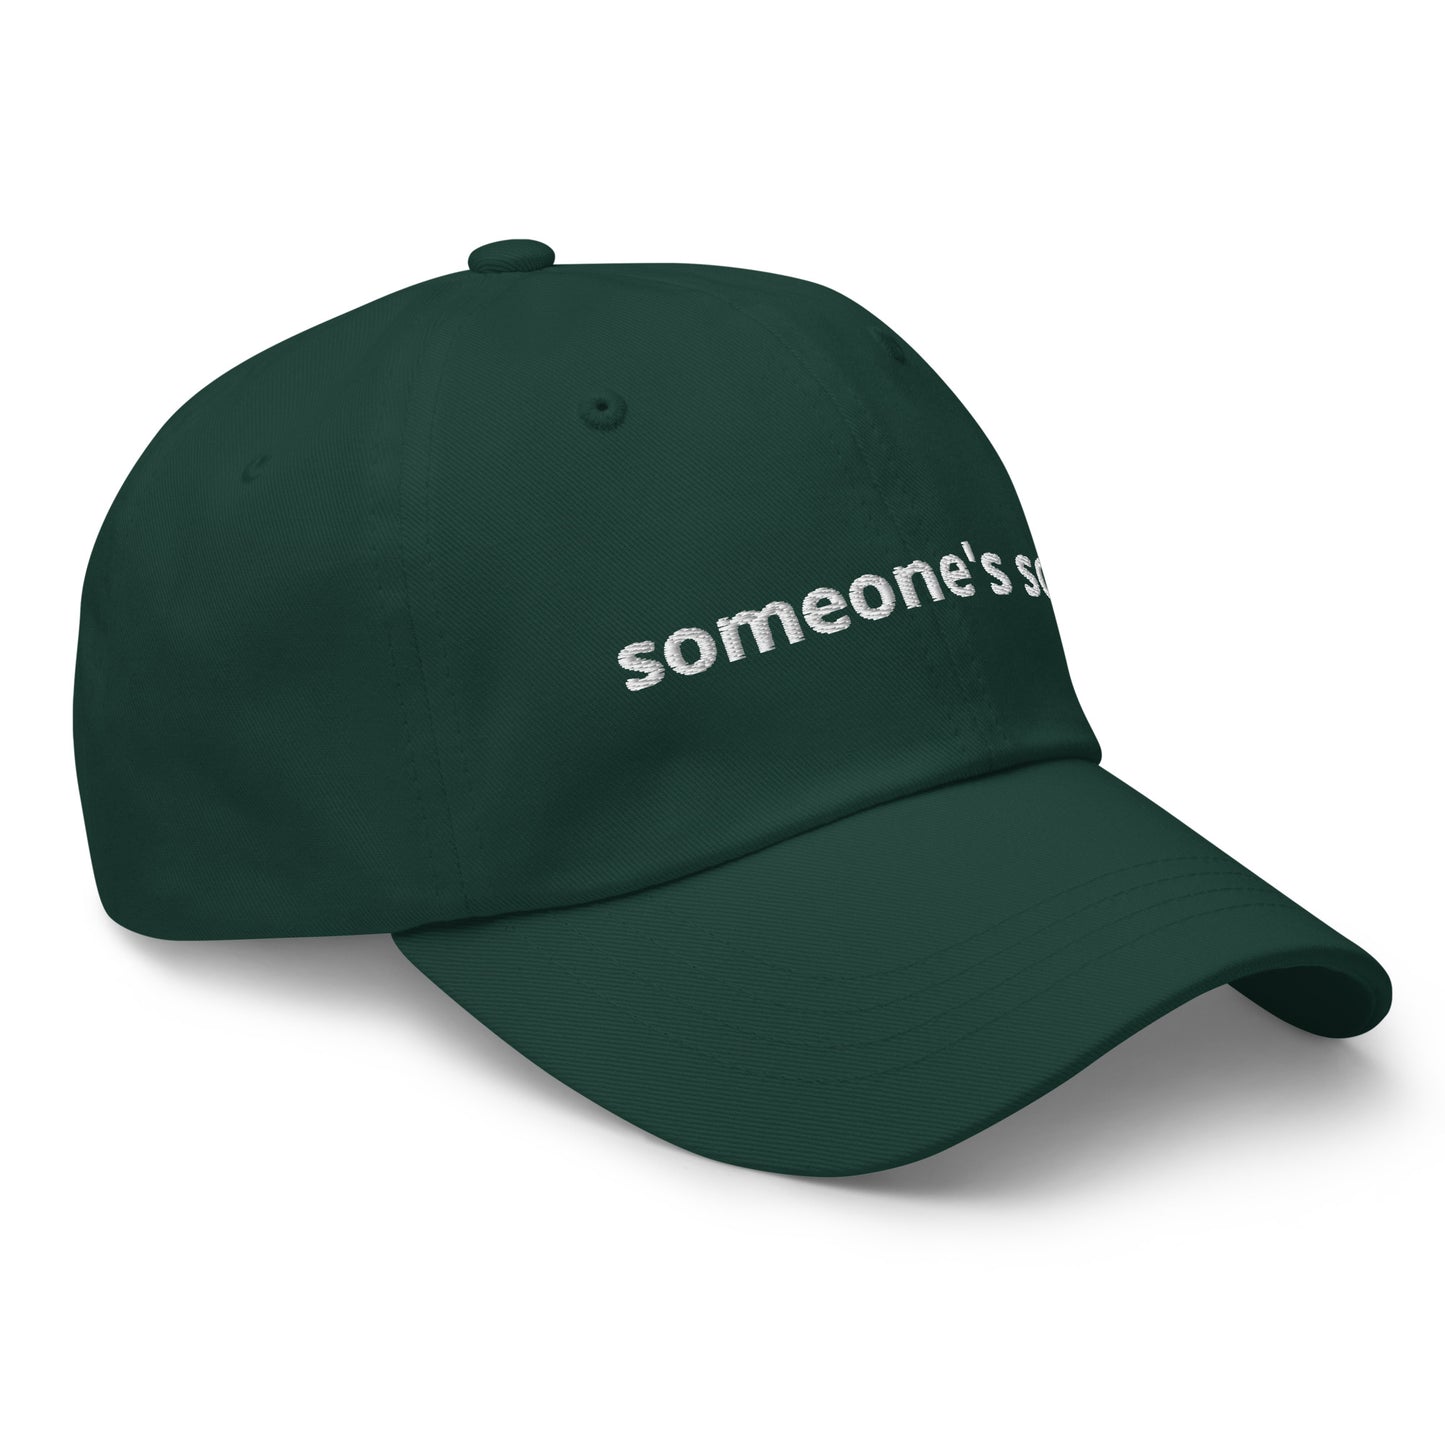 Someone's son dad hat